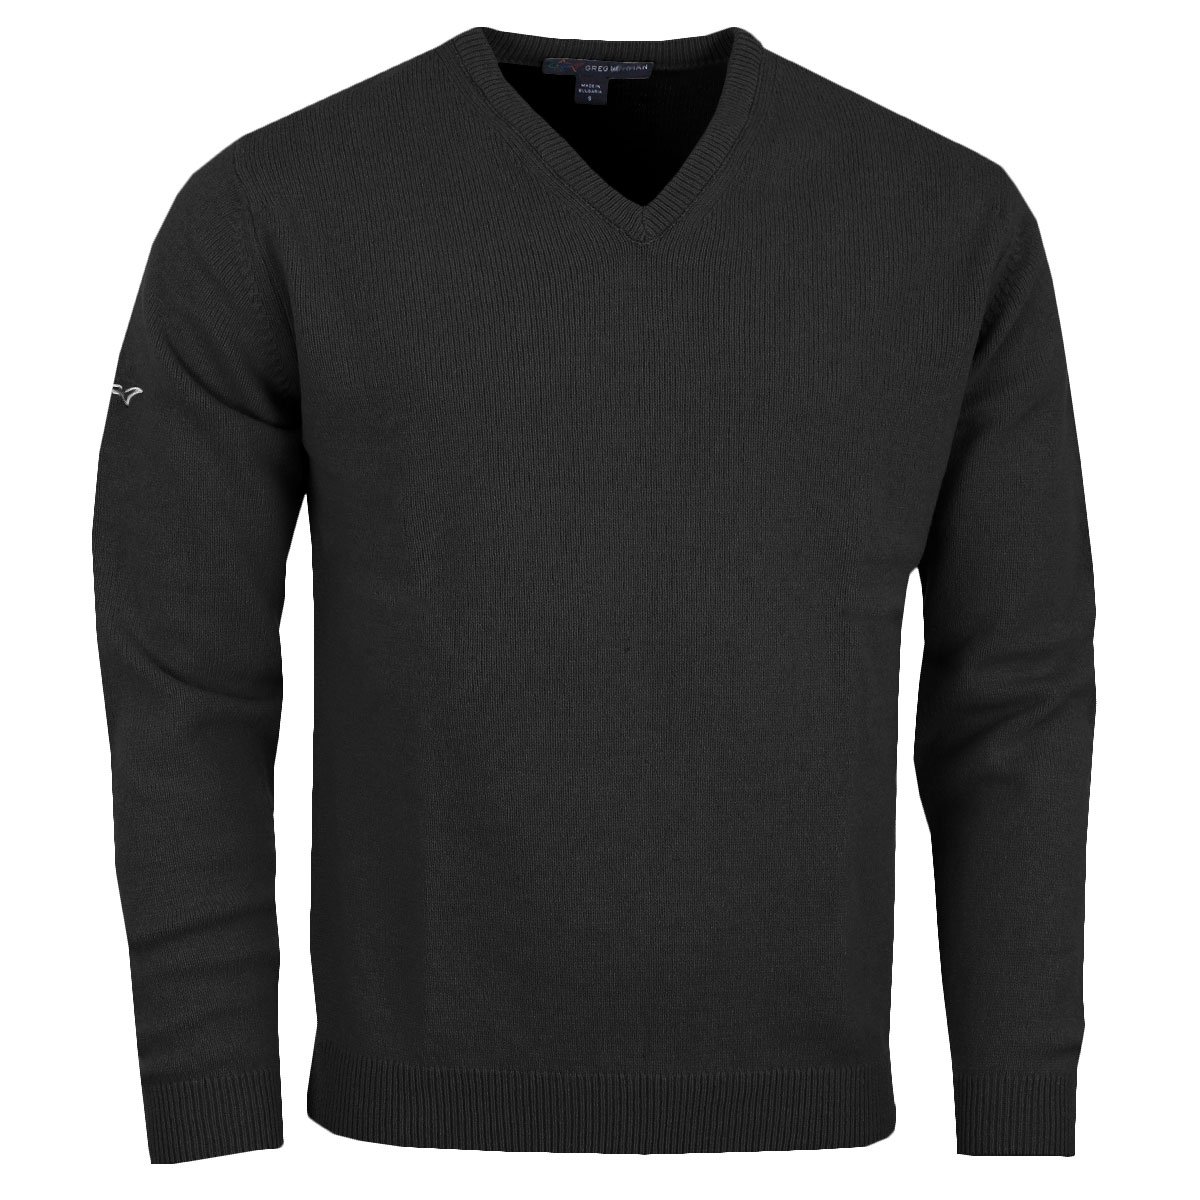 Greg Norman Mens V-Neck Lambswool Sweater Golf Pullovers